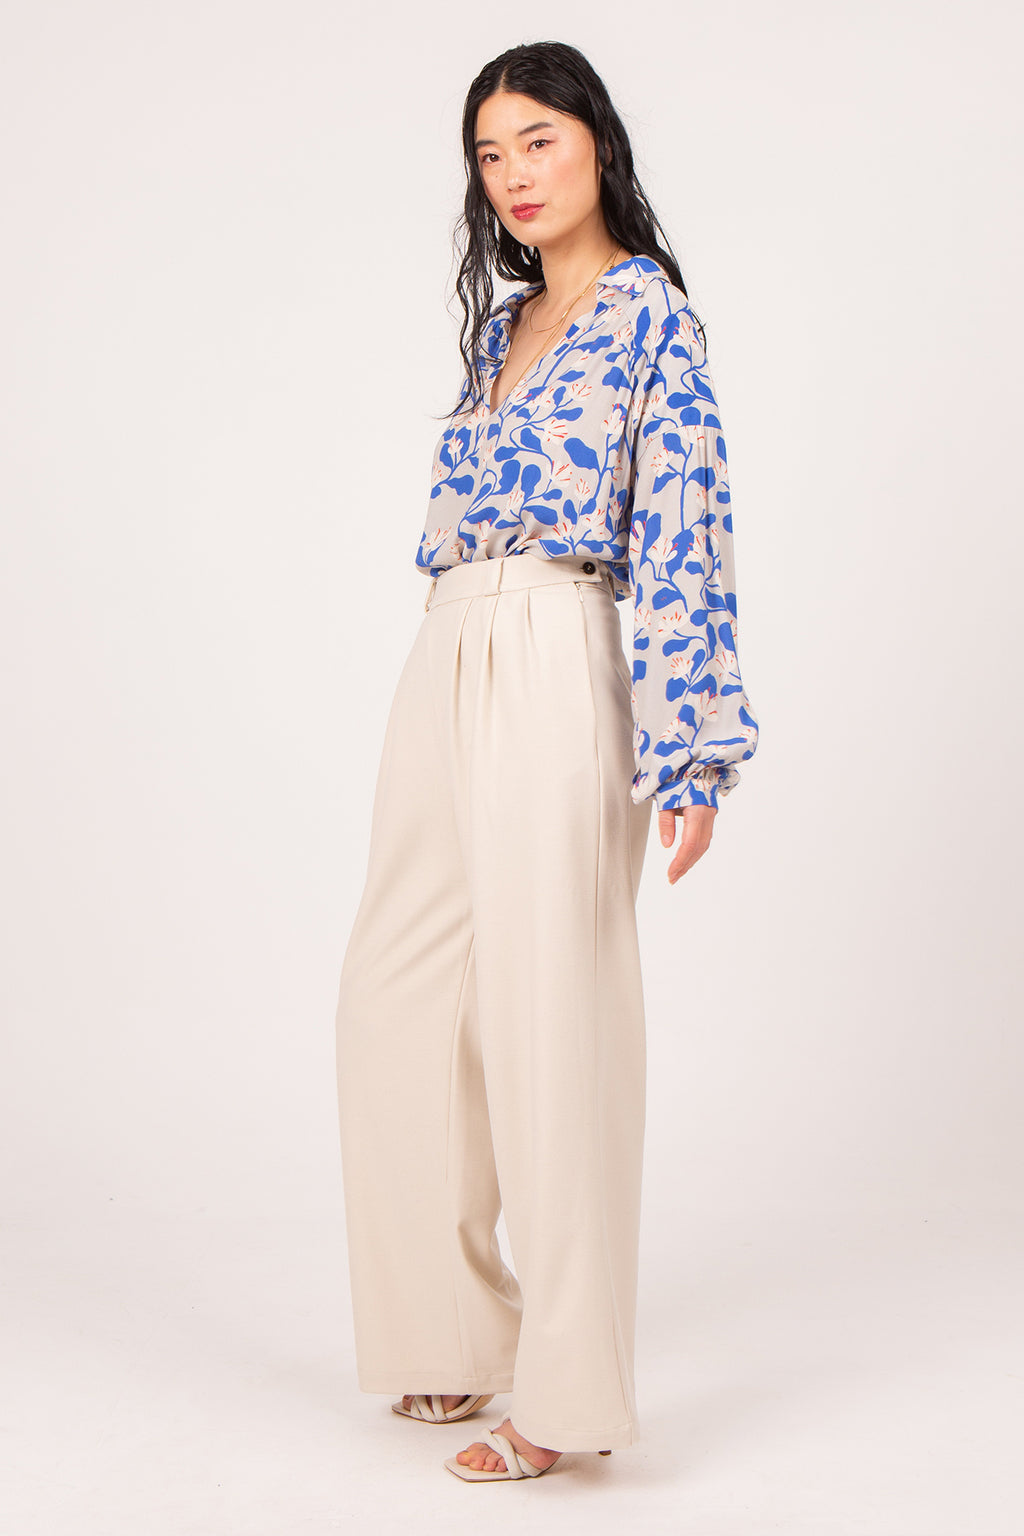 Betty blouse in small white lotus